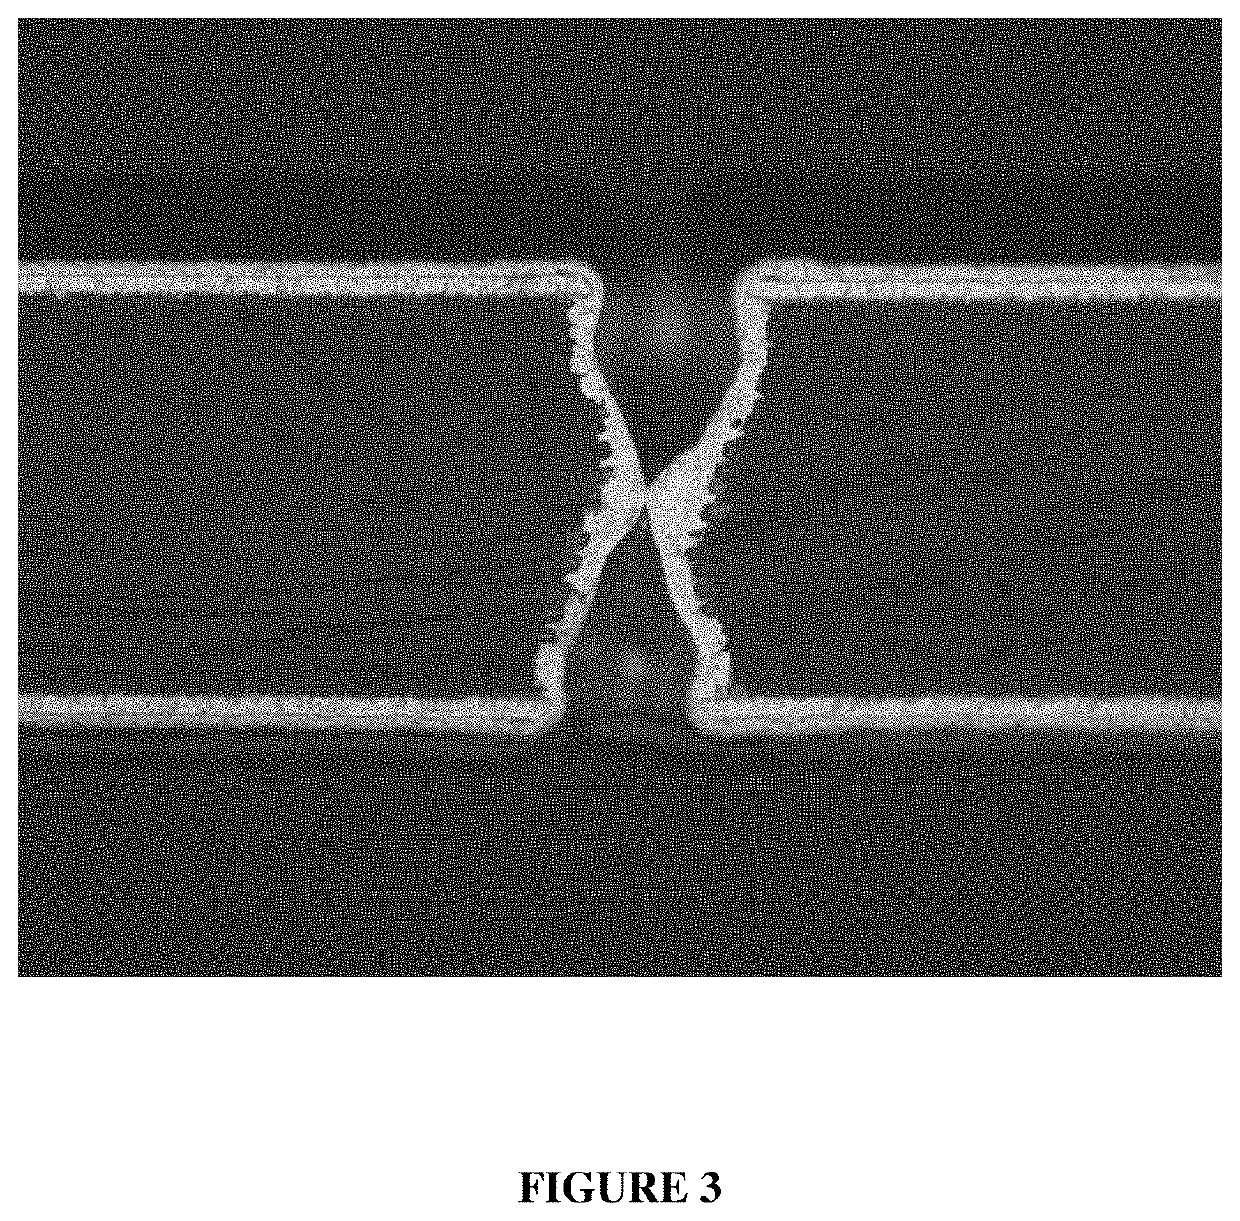 Method of filling through-holes to reduce voids and other defects